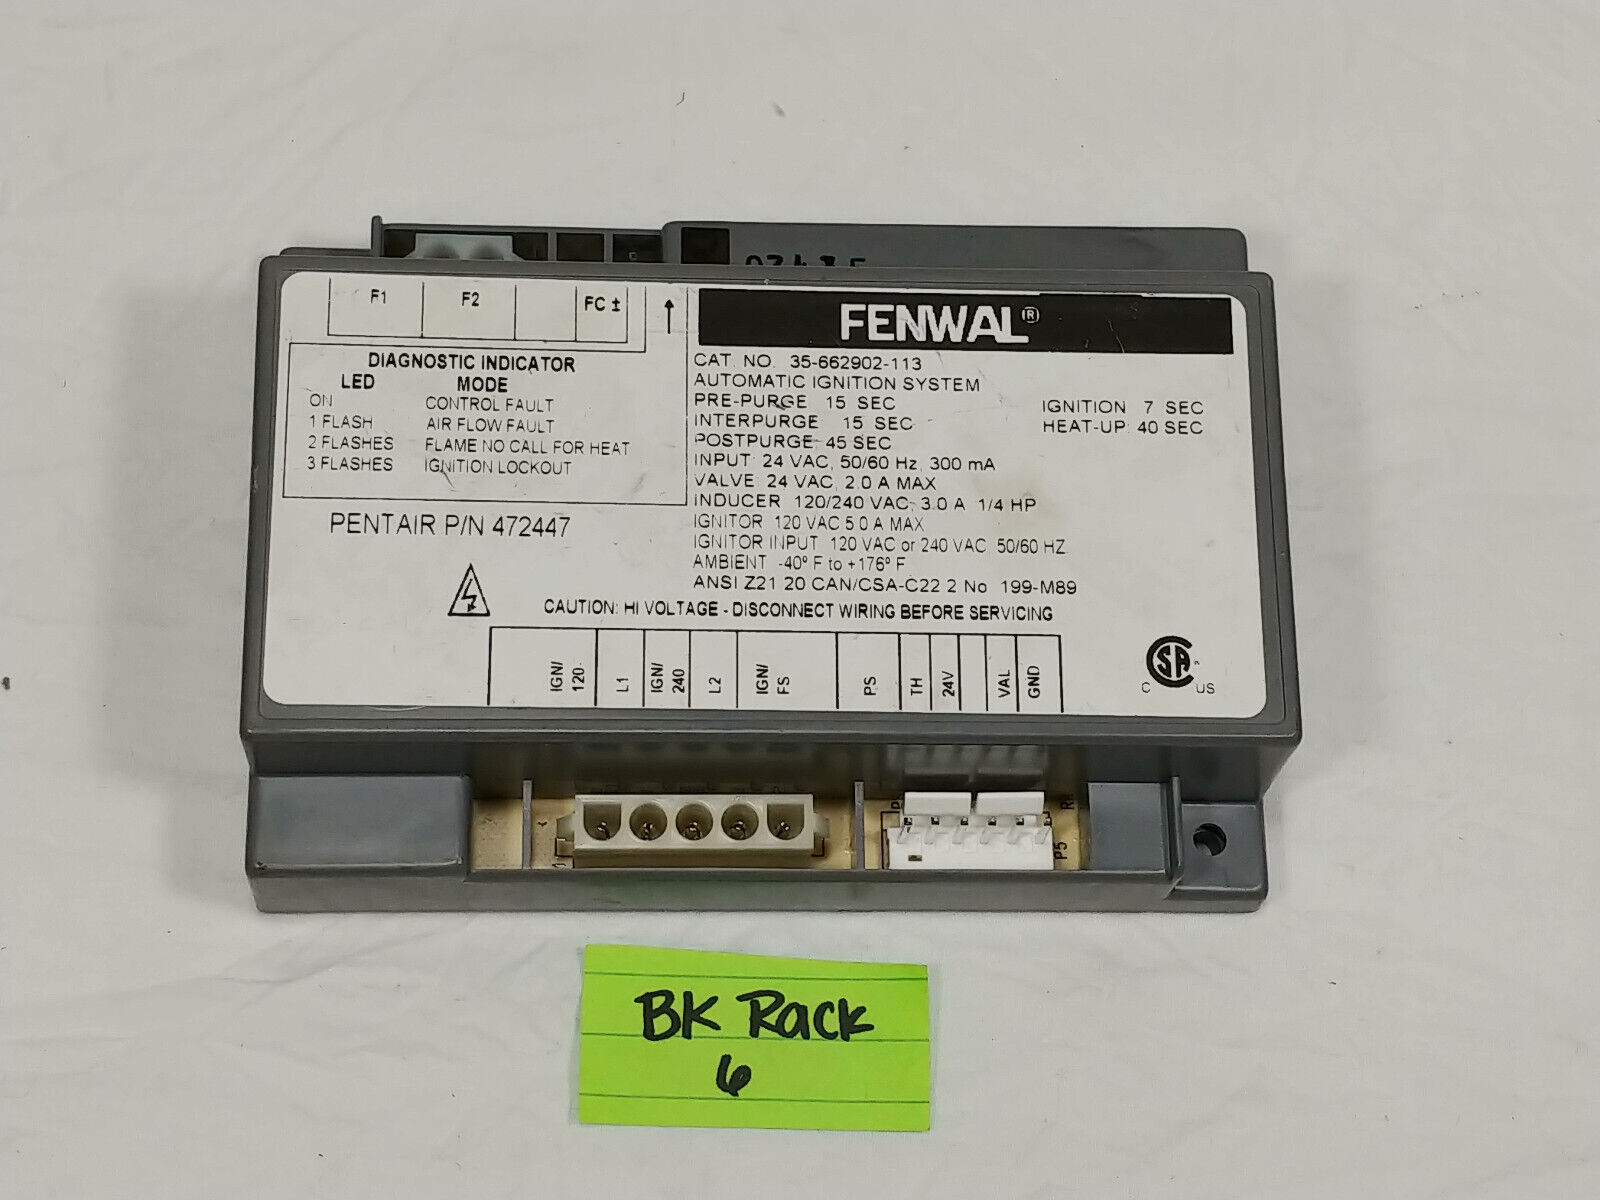 Fenwal 35-662902-113 Automatic Ignition Control System Pentair 472447